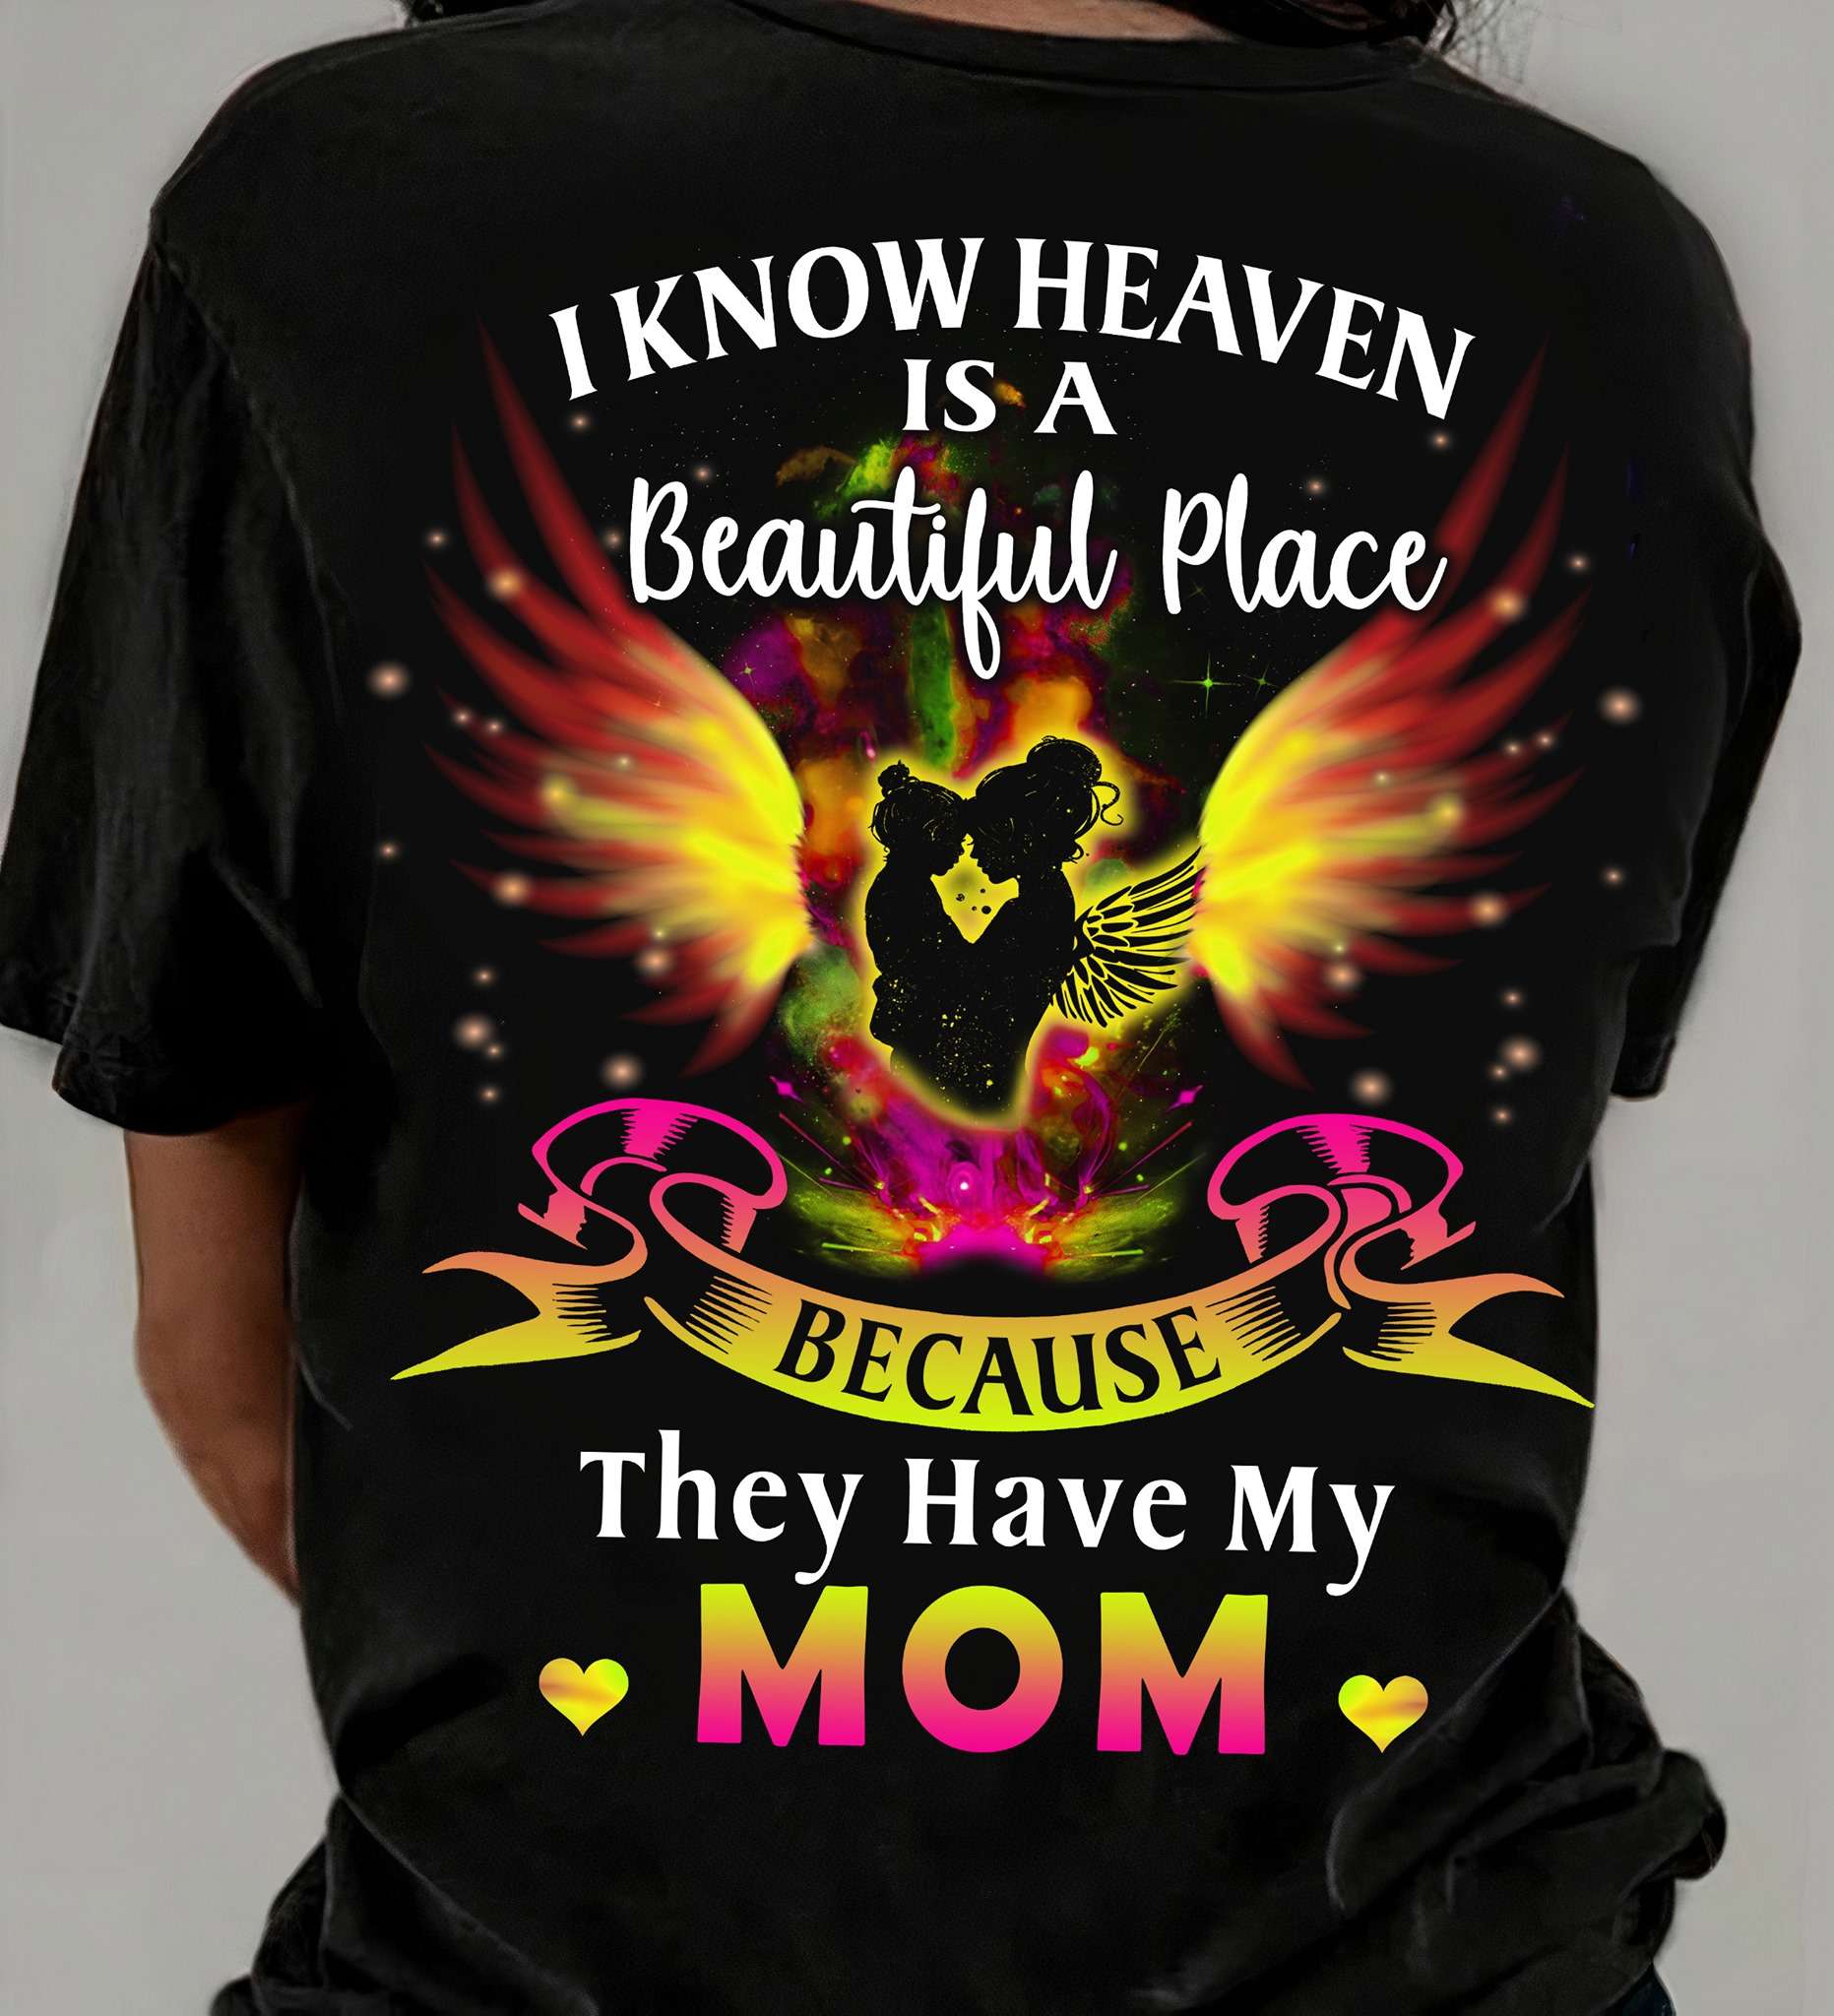 I know heaven is a beautiful place because they have my mom